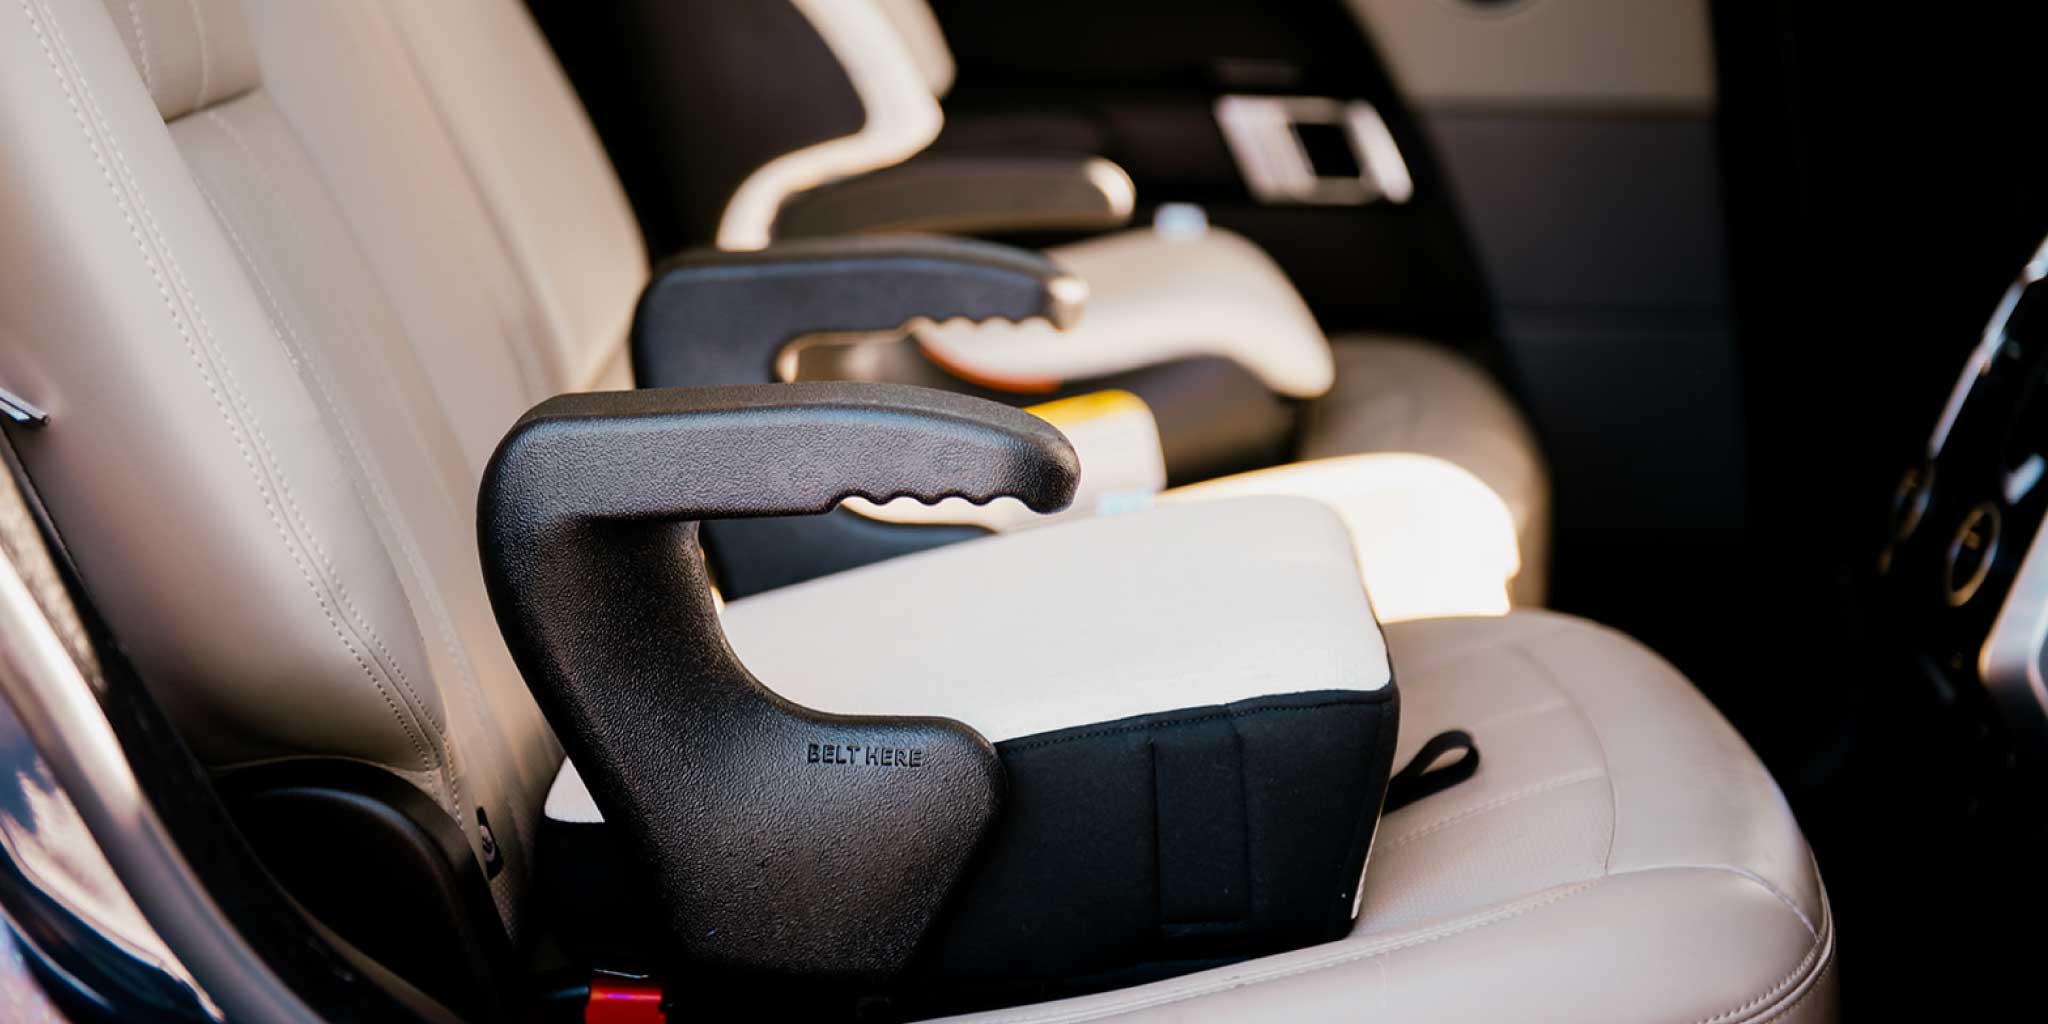 Clek Olli booster seat in Marshmallow fabric installed in a Range Rover SUV